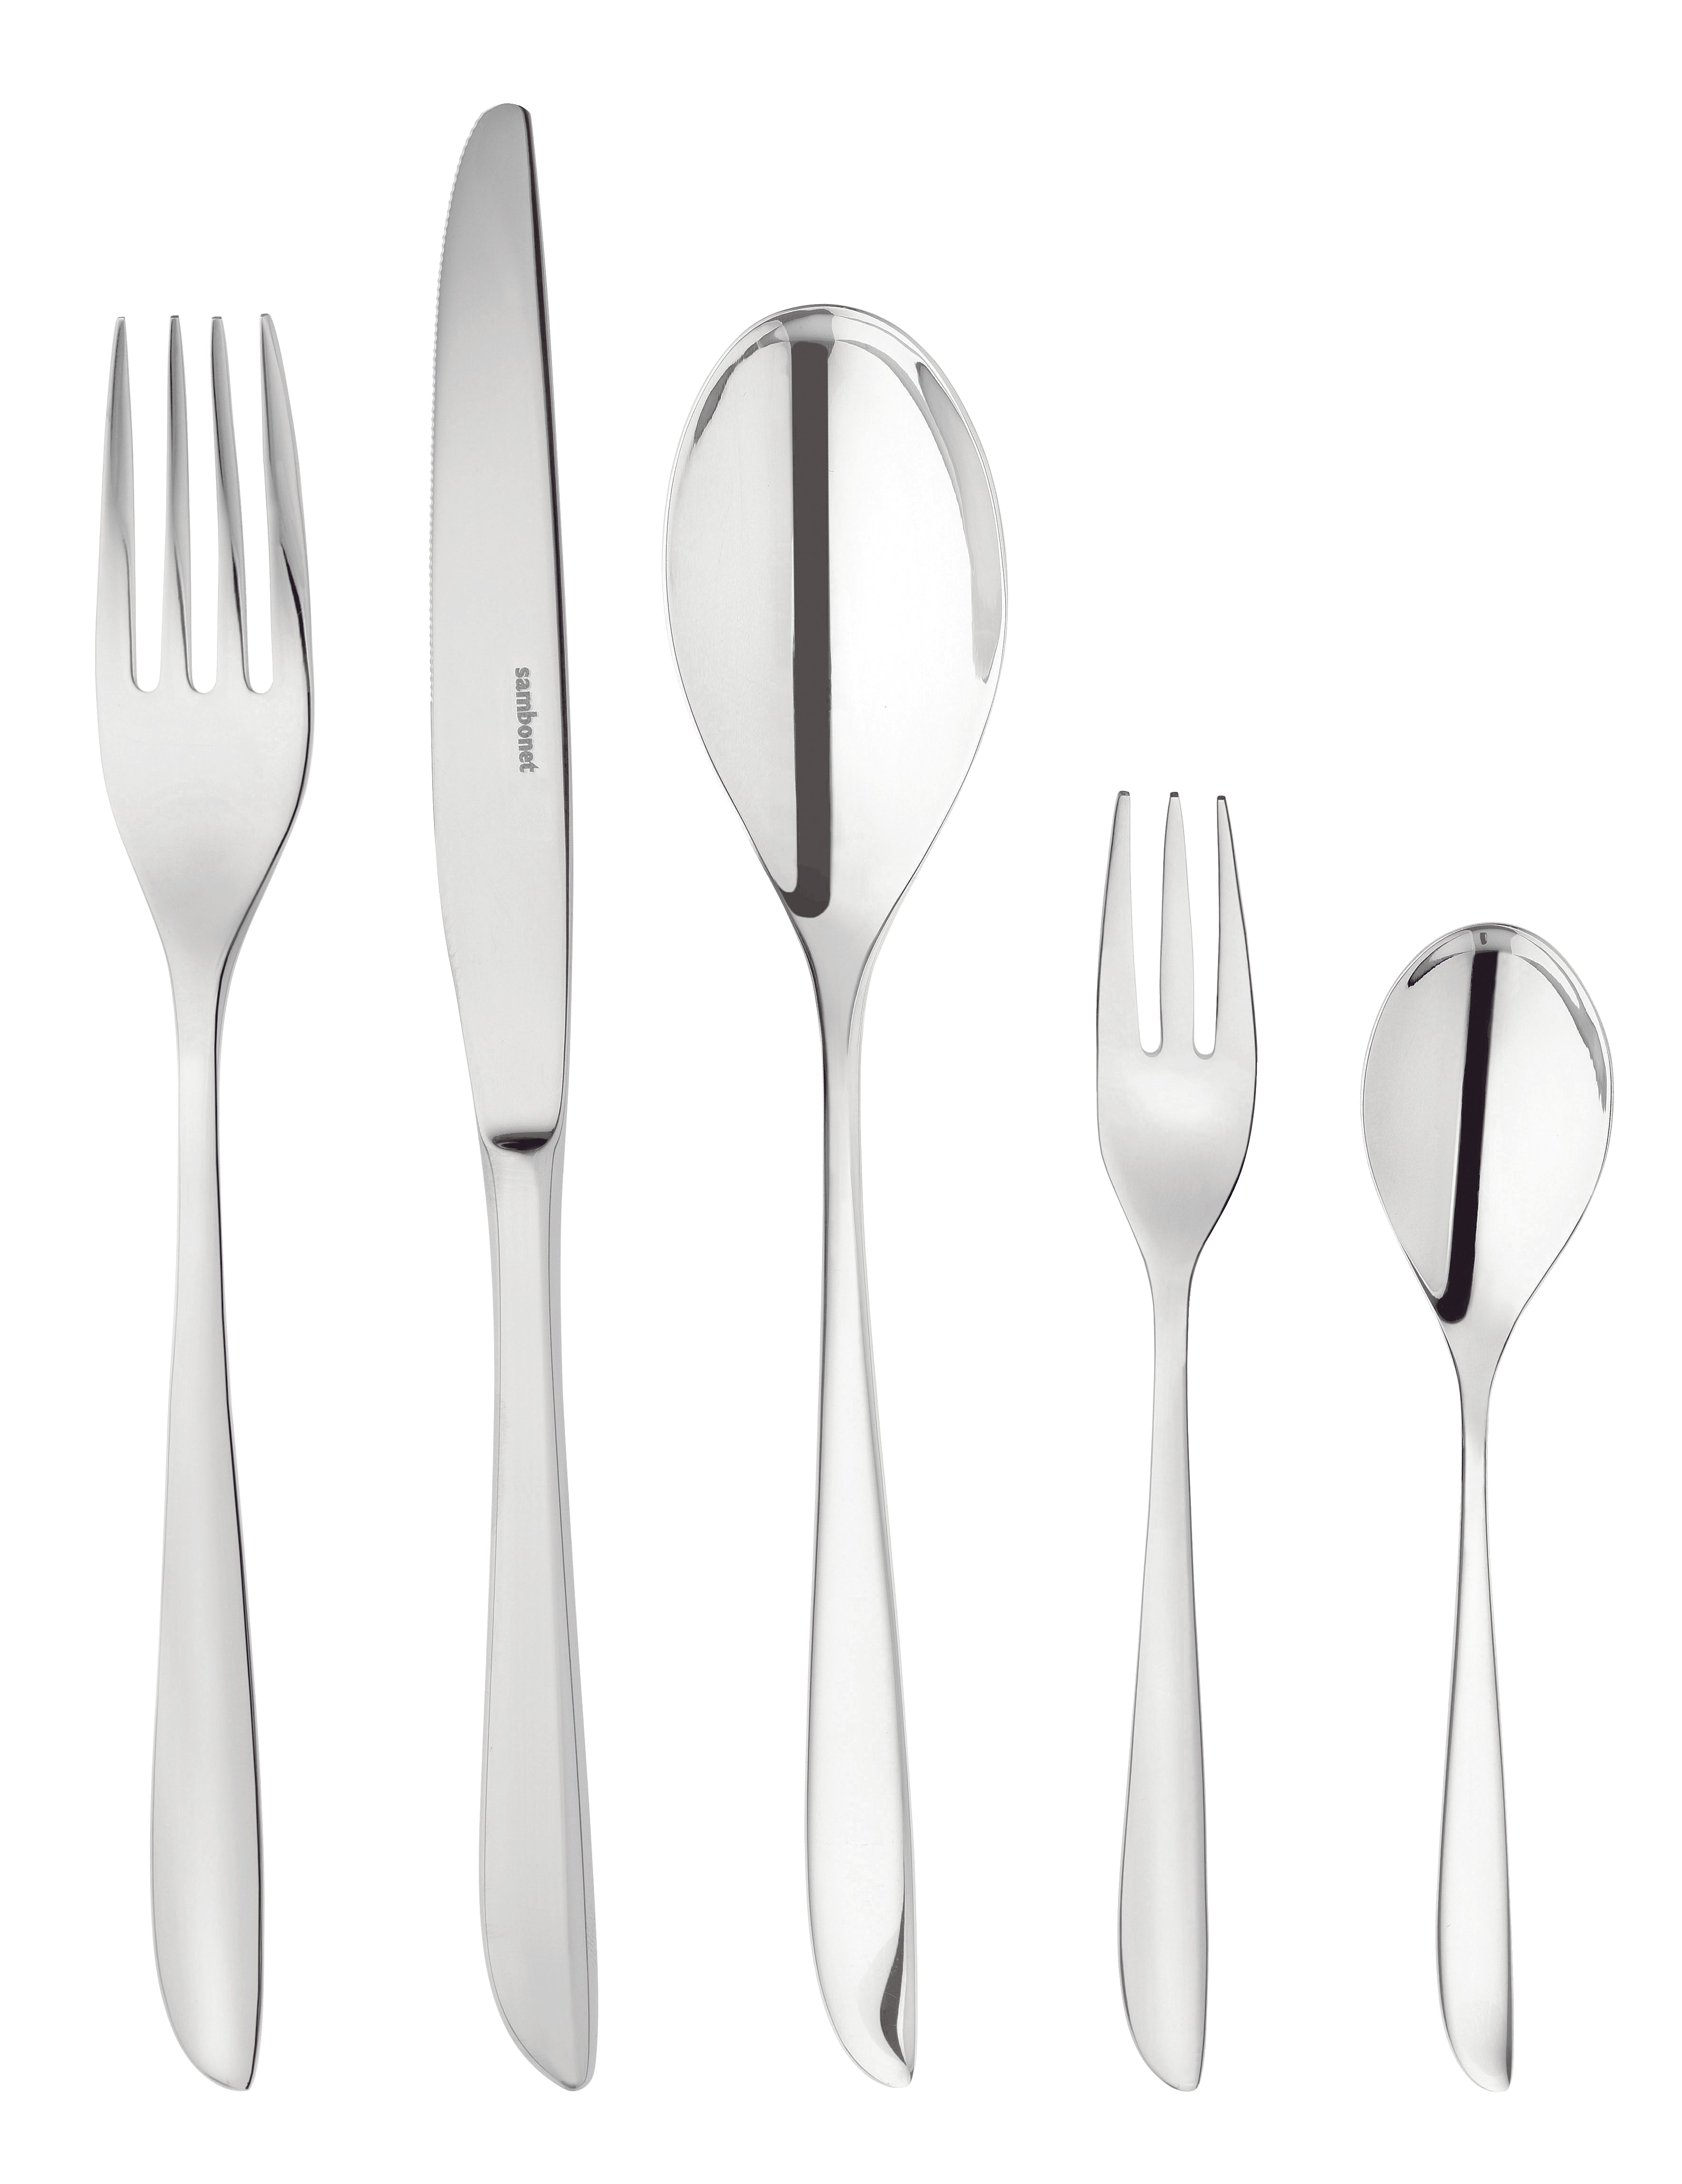 Sambonet Leaf Monobloc 60-piece set in stainless steel for 12 people